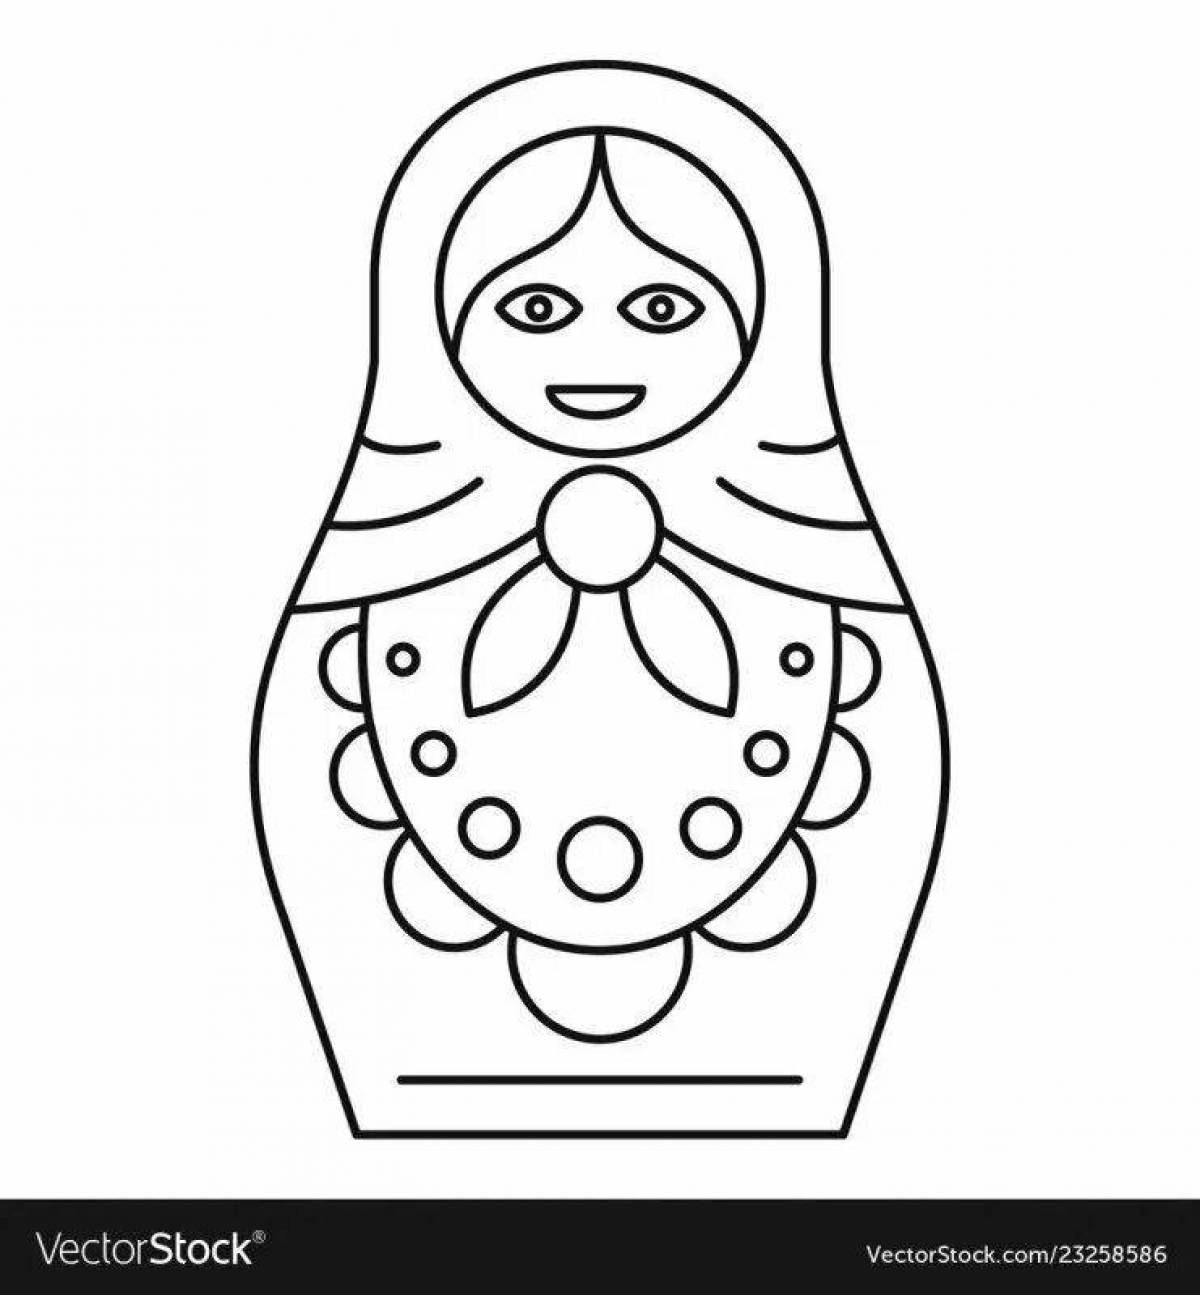 Matryoshka in the middle group #2